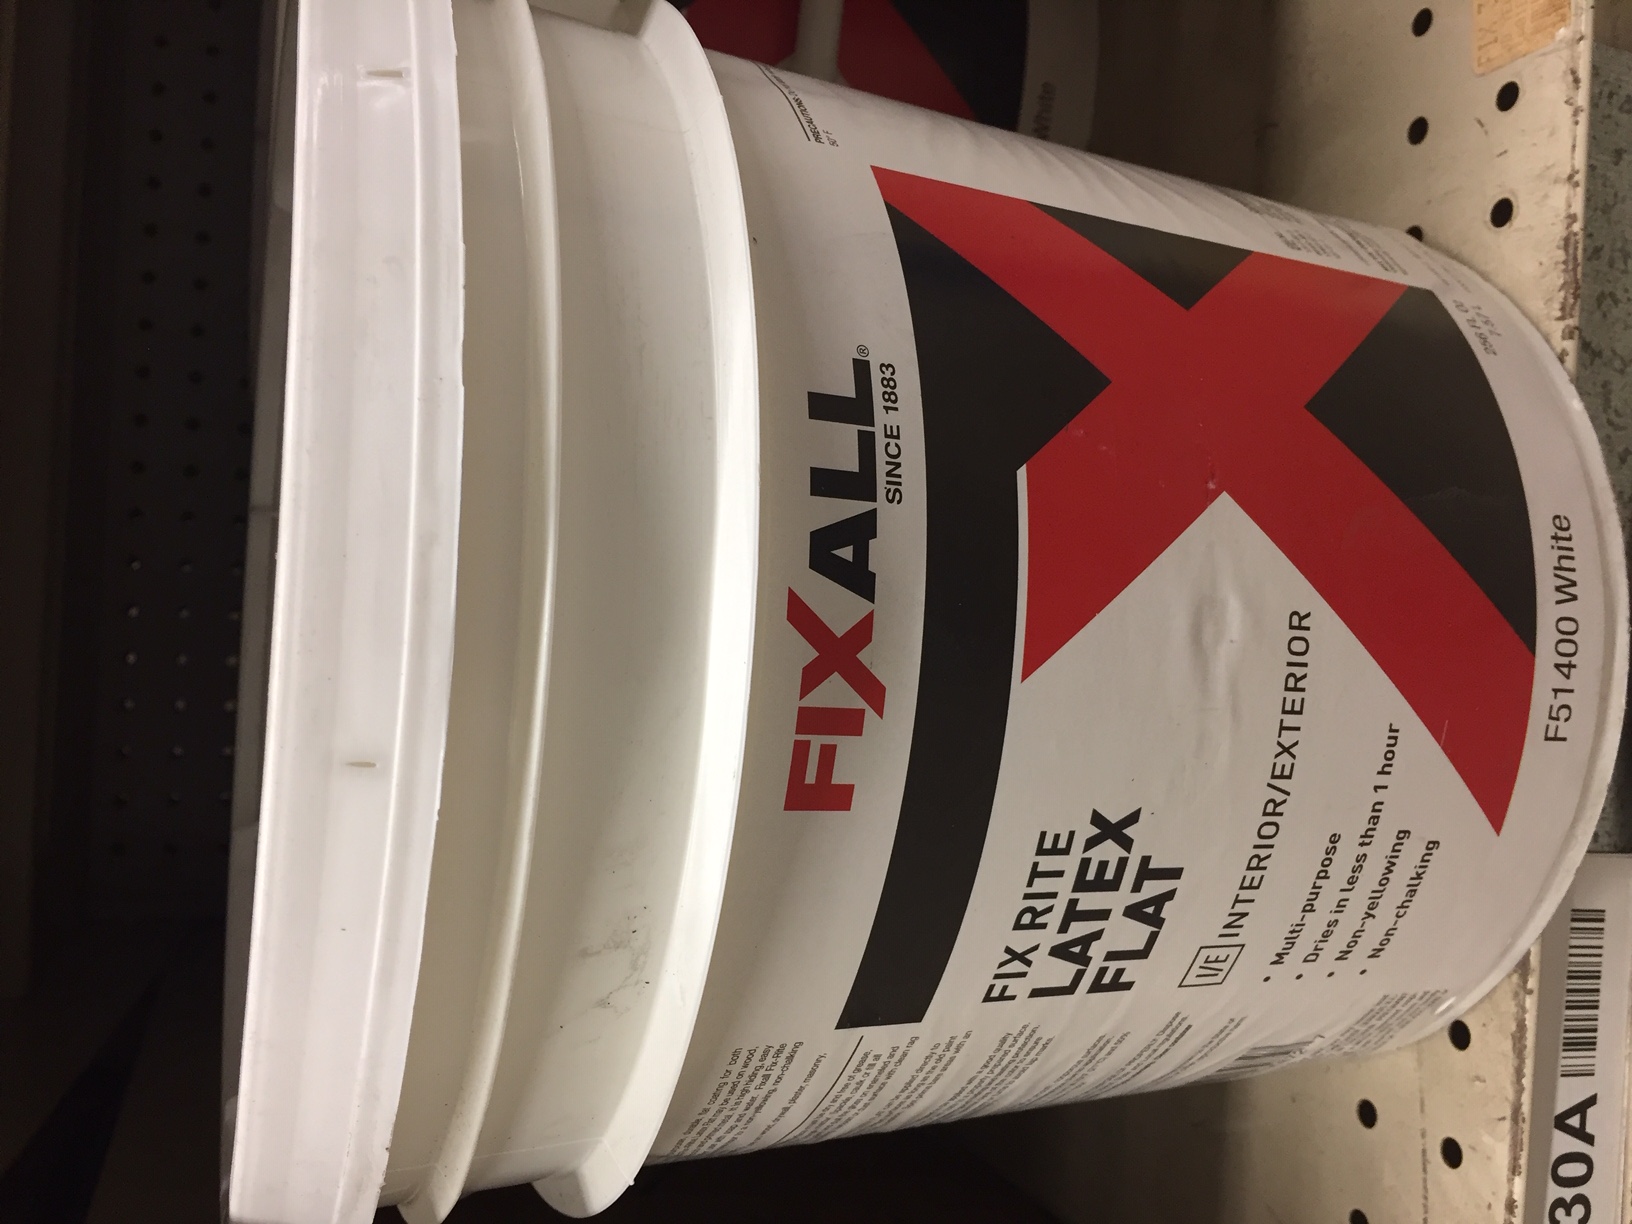 FIXALL 5 GALLON RED METAL
PRIMER OIL BASE